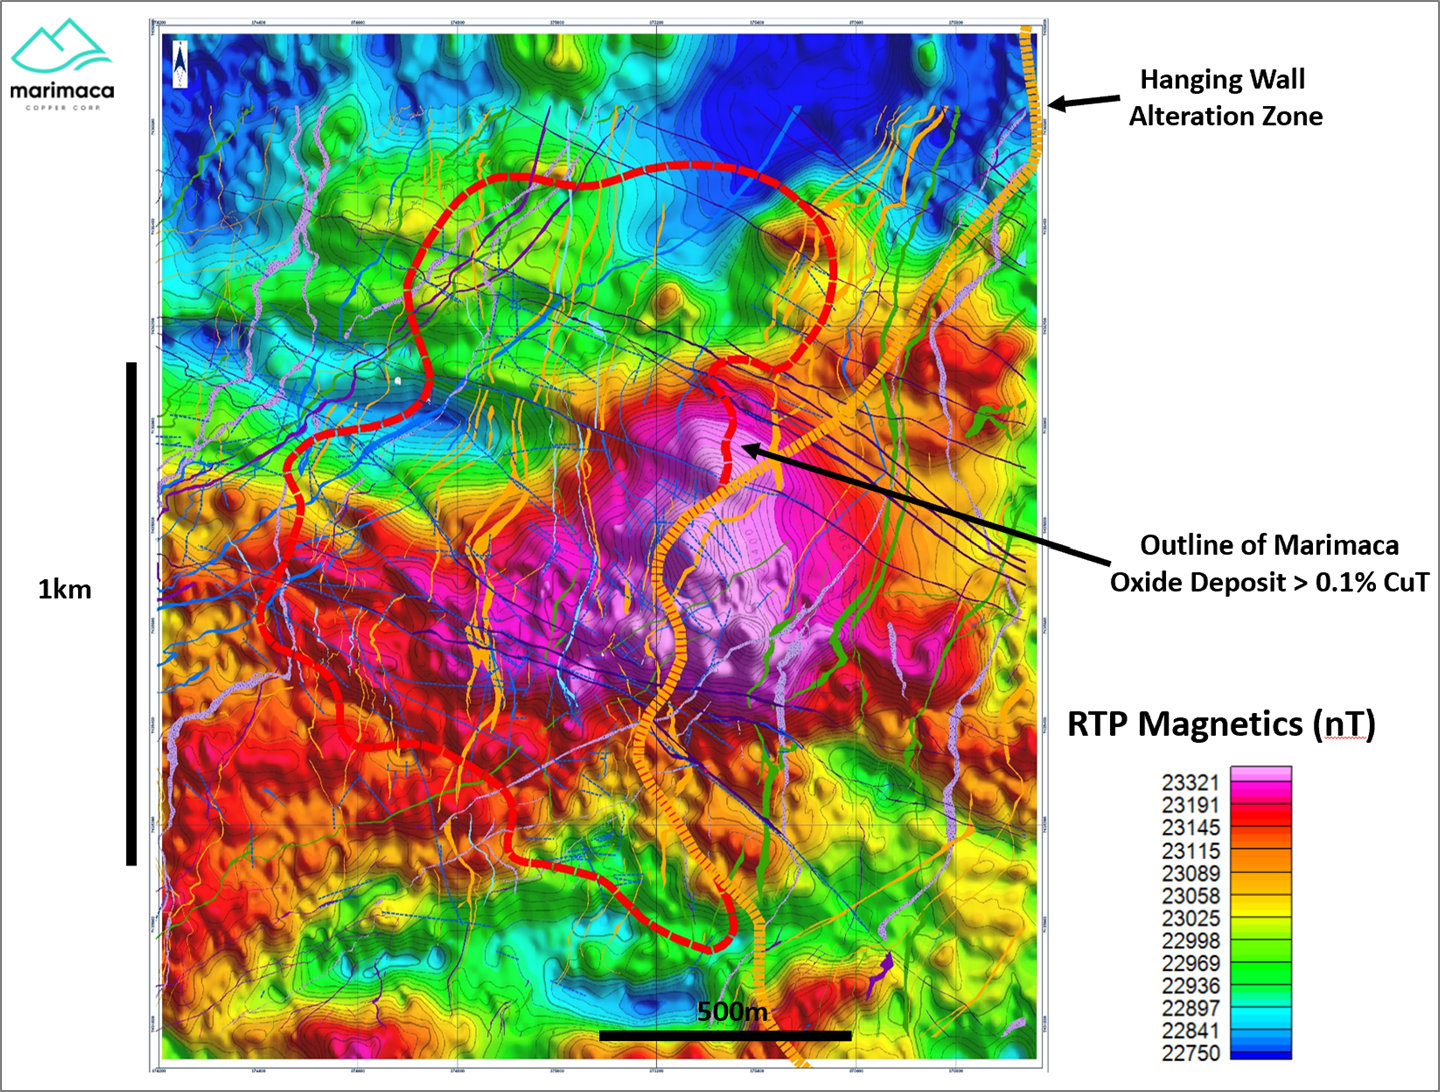 Marimaca Large Scale Magnetic Anomaly with